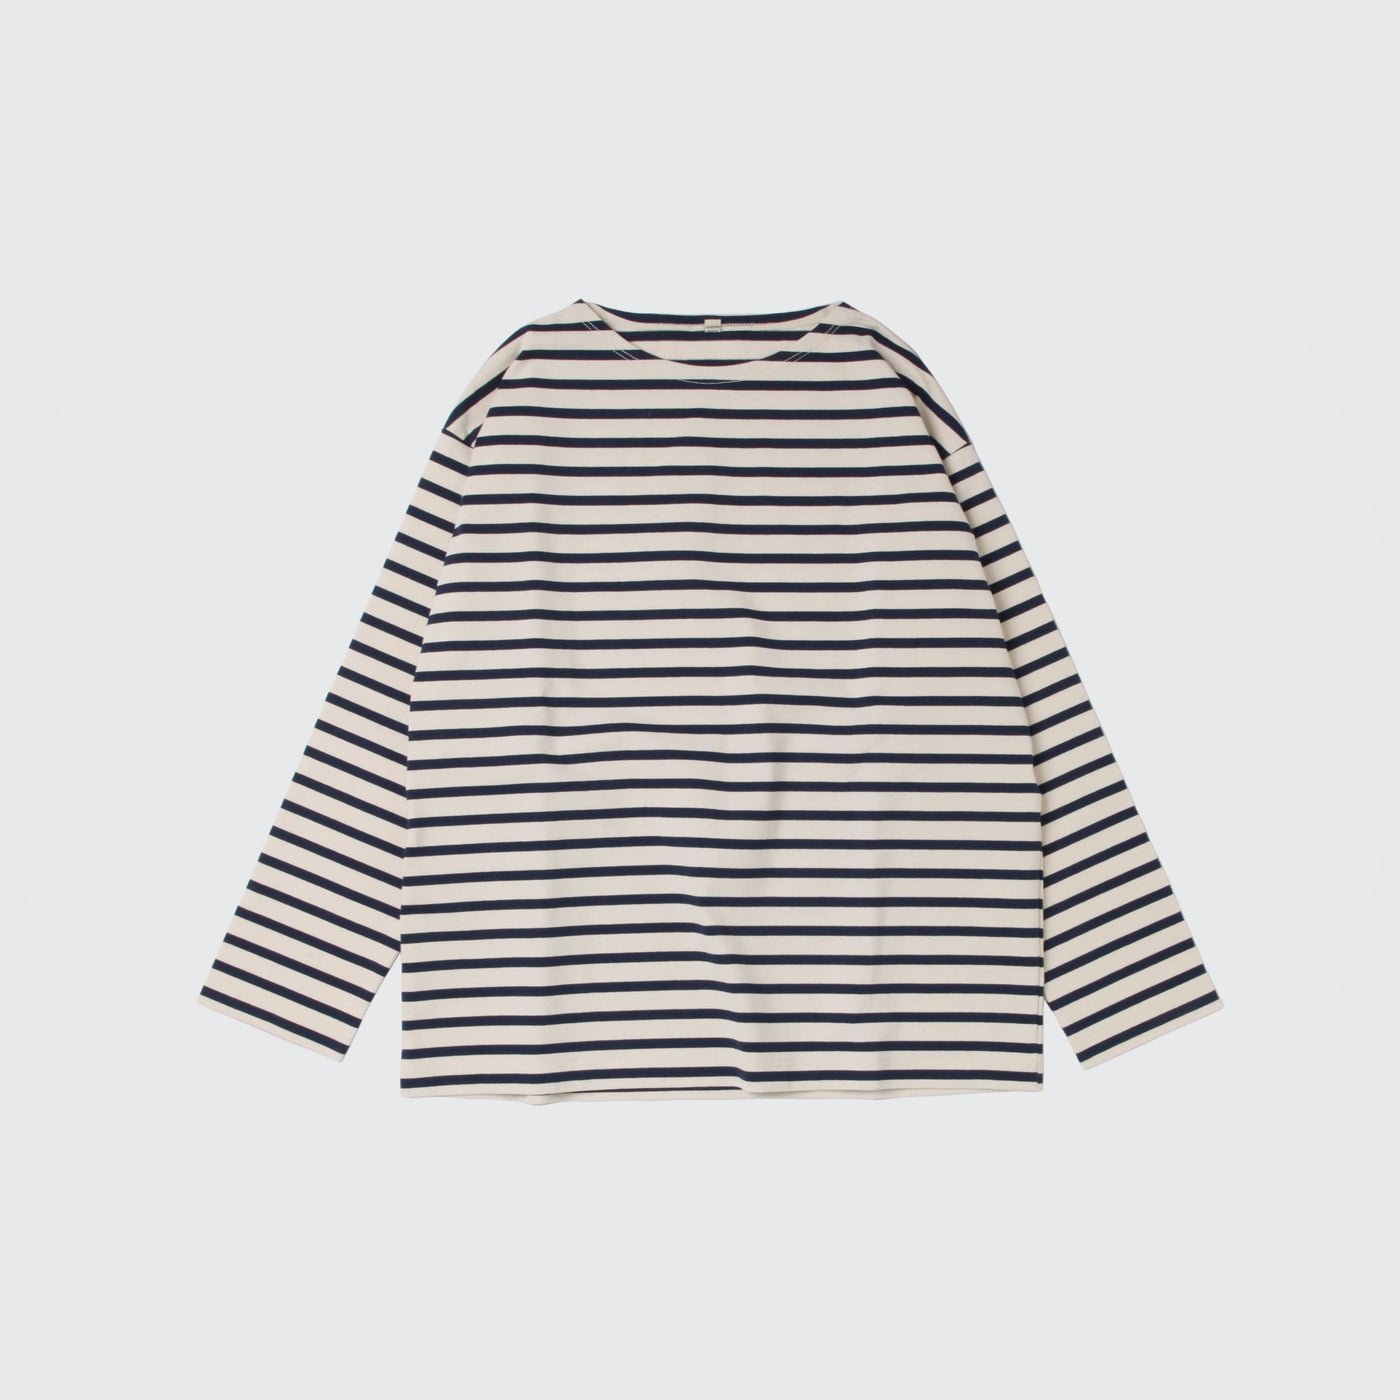 PREMIER H. WEIGHT BORDER L/S TEE